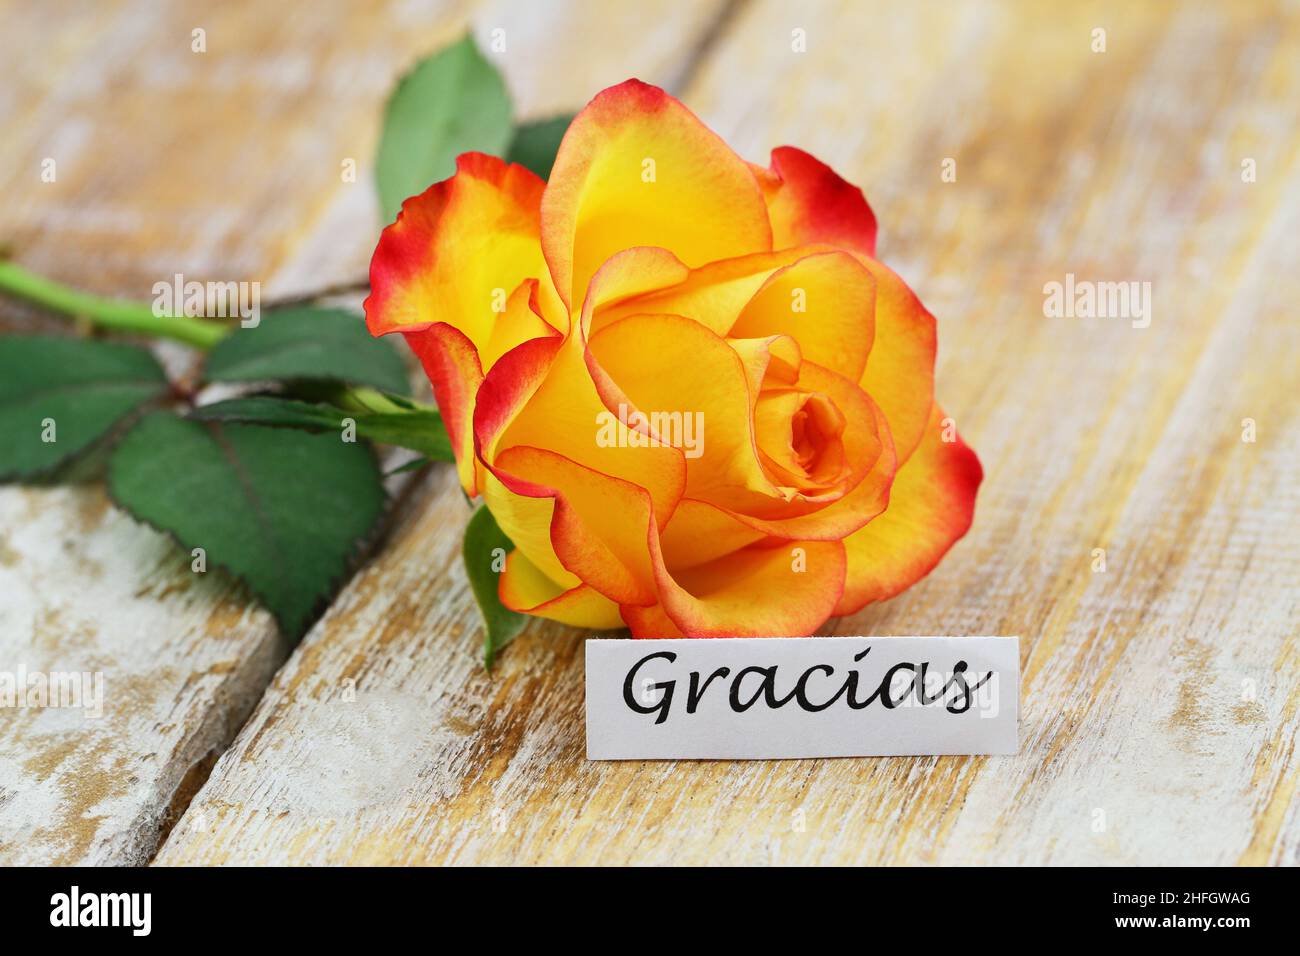 Gracias (thank you in Spanish) card with one colorful rose on wooden surface Stock Photo